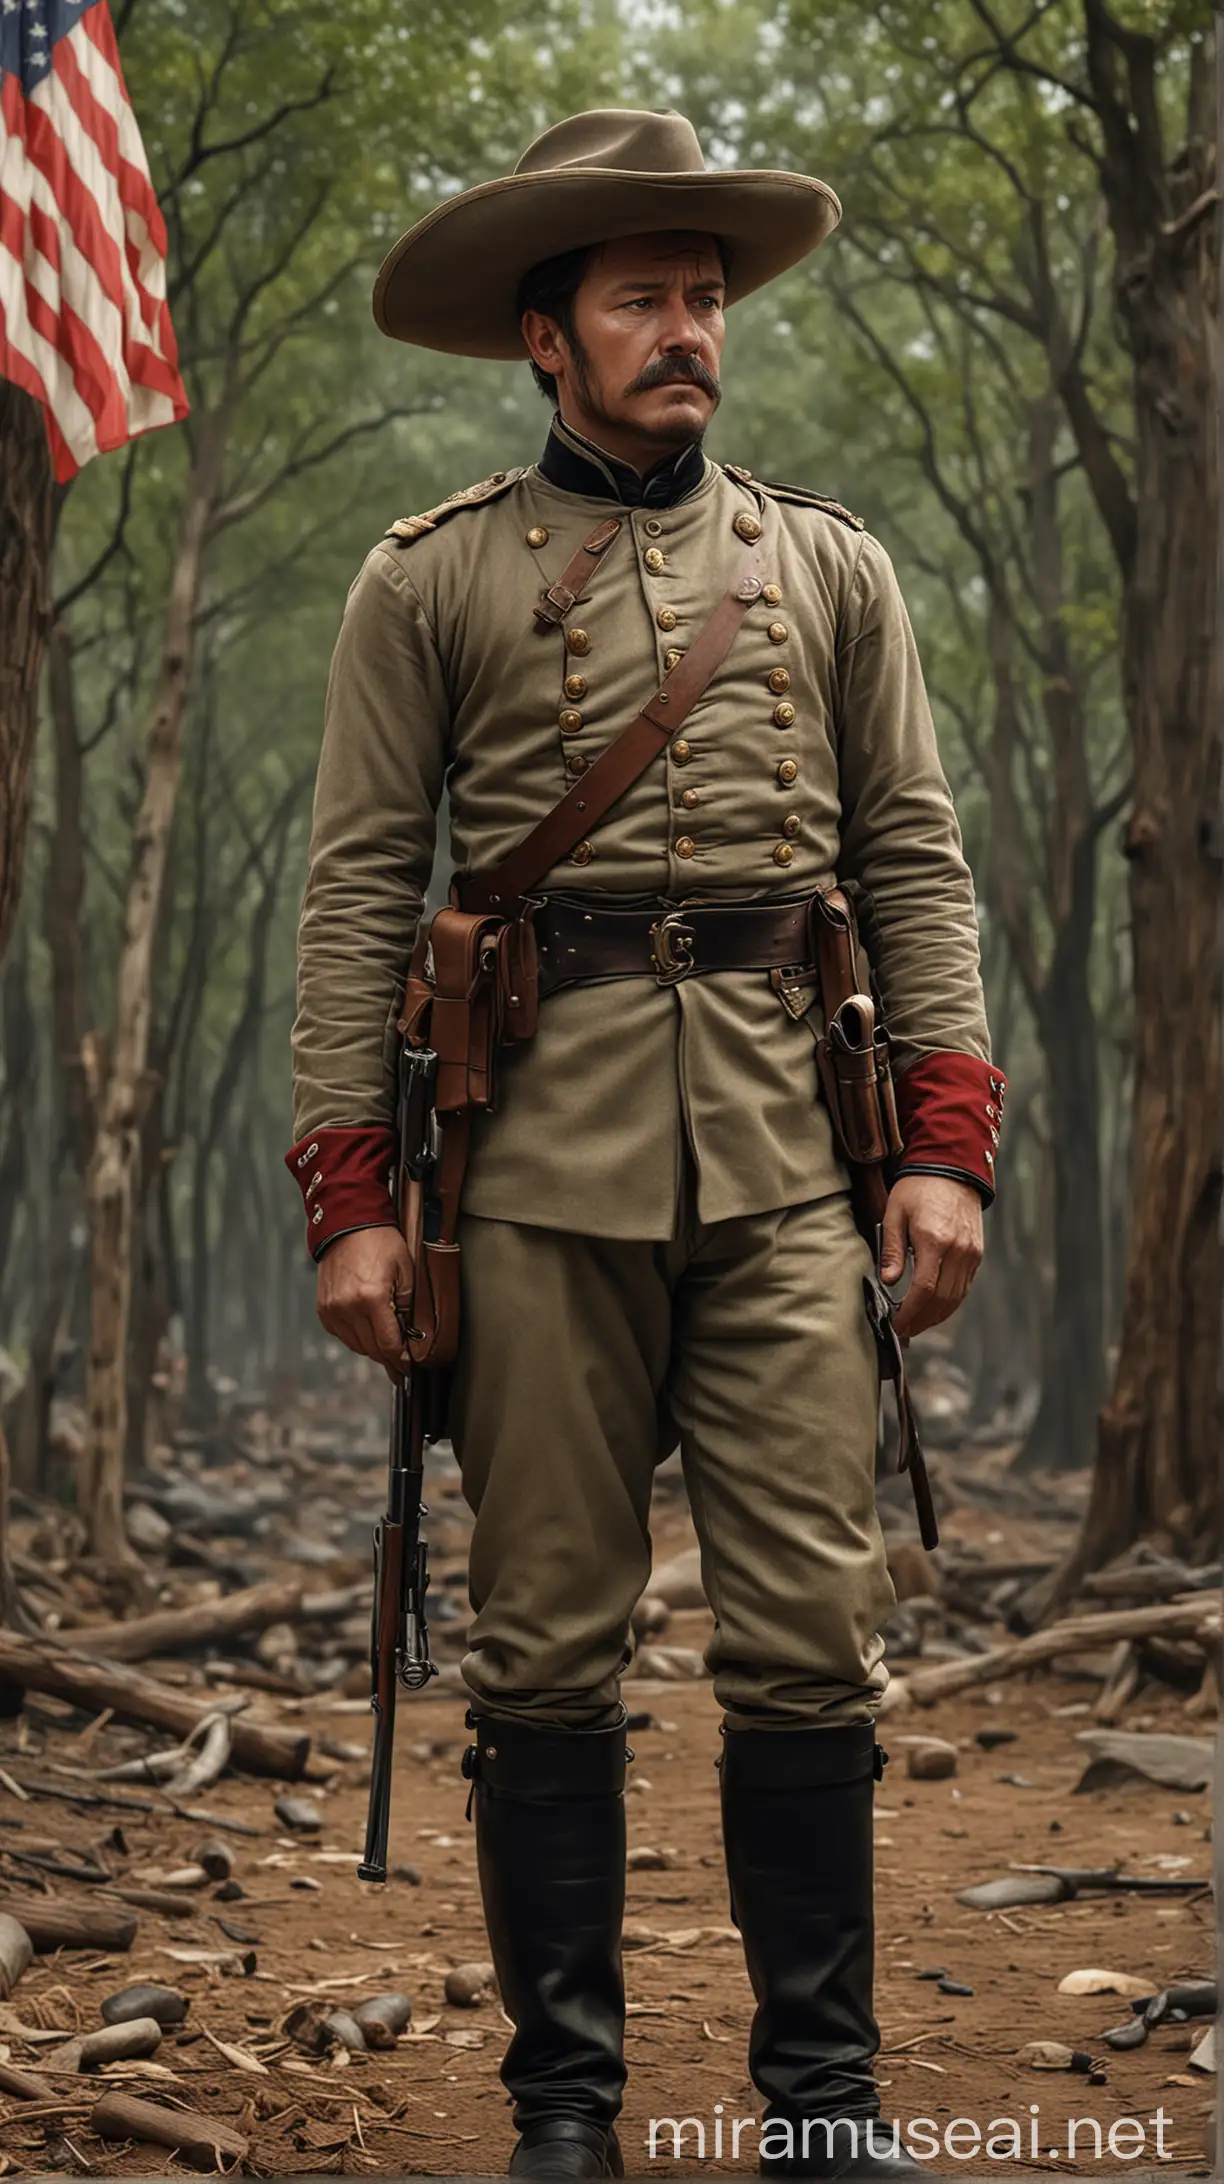 Create a scene of Lee in the Mexican-American War, demonstrating his bravery and tactical brilliance, possibly alongside General Winfield Scott. hyper realistic